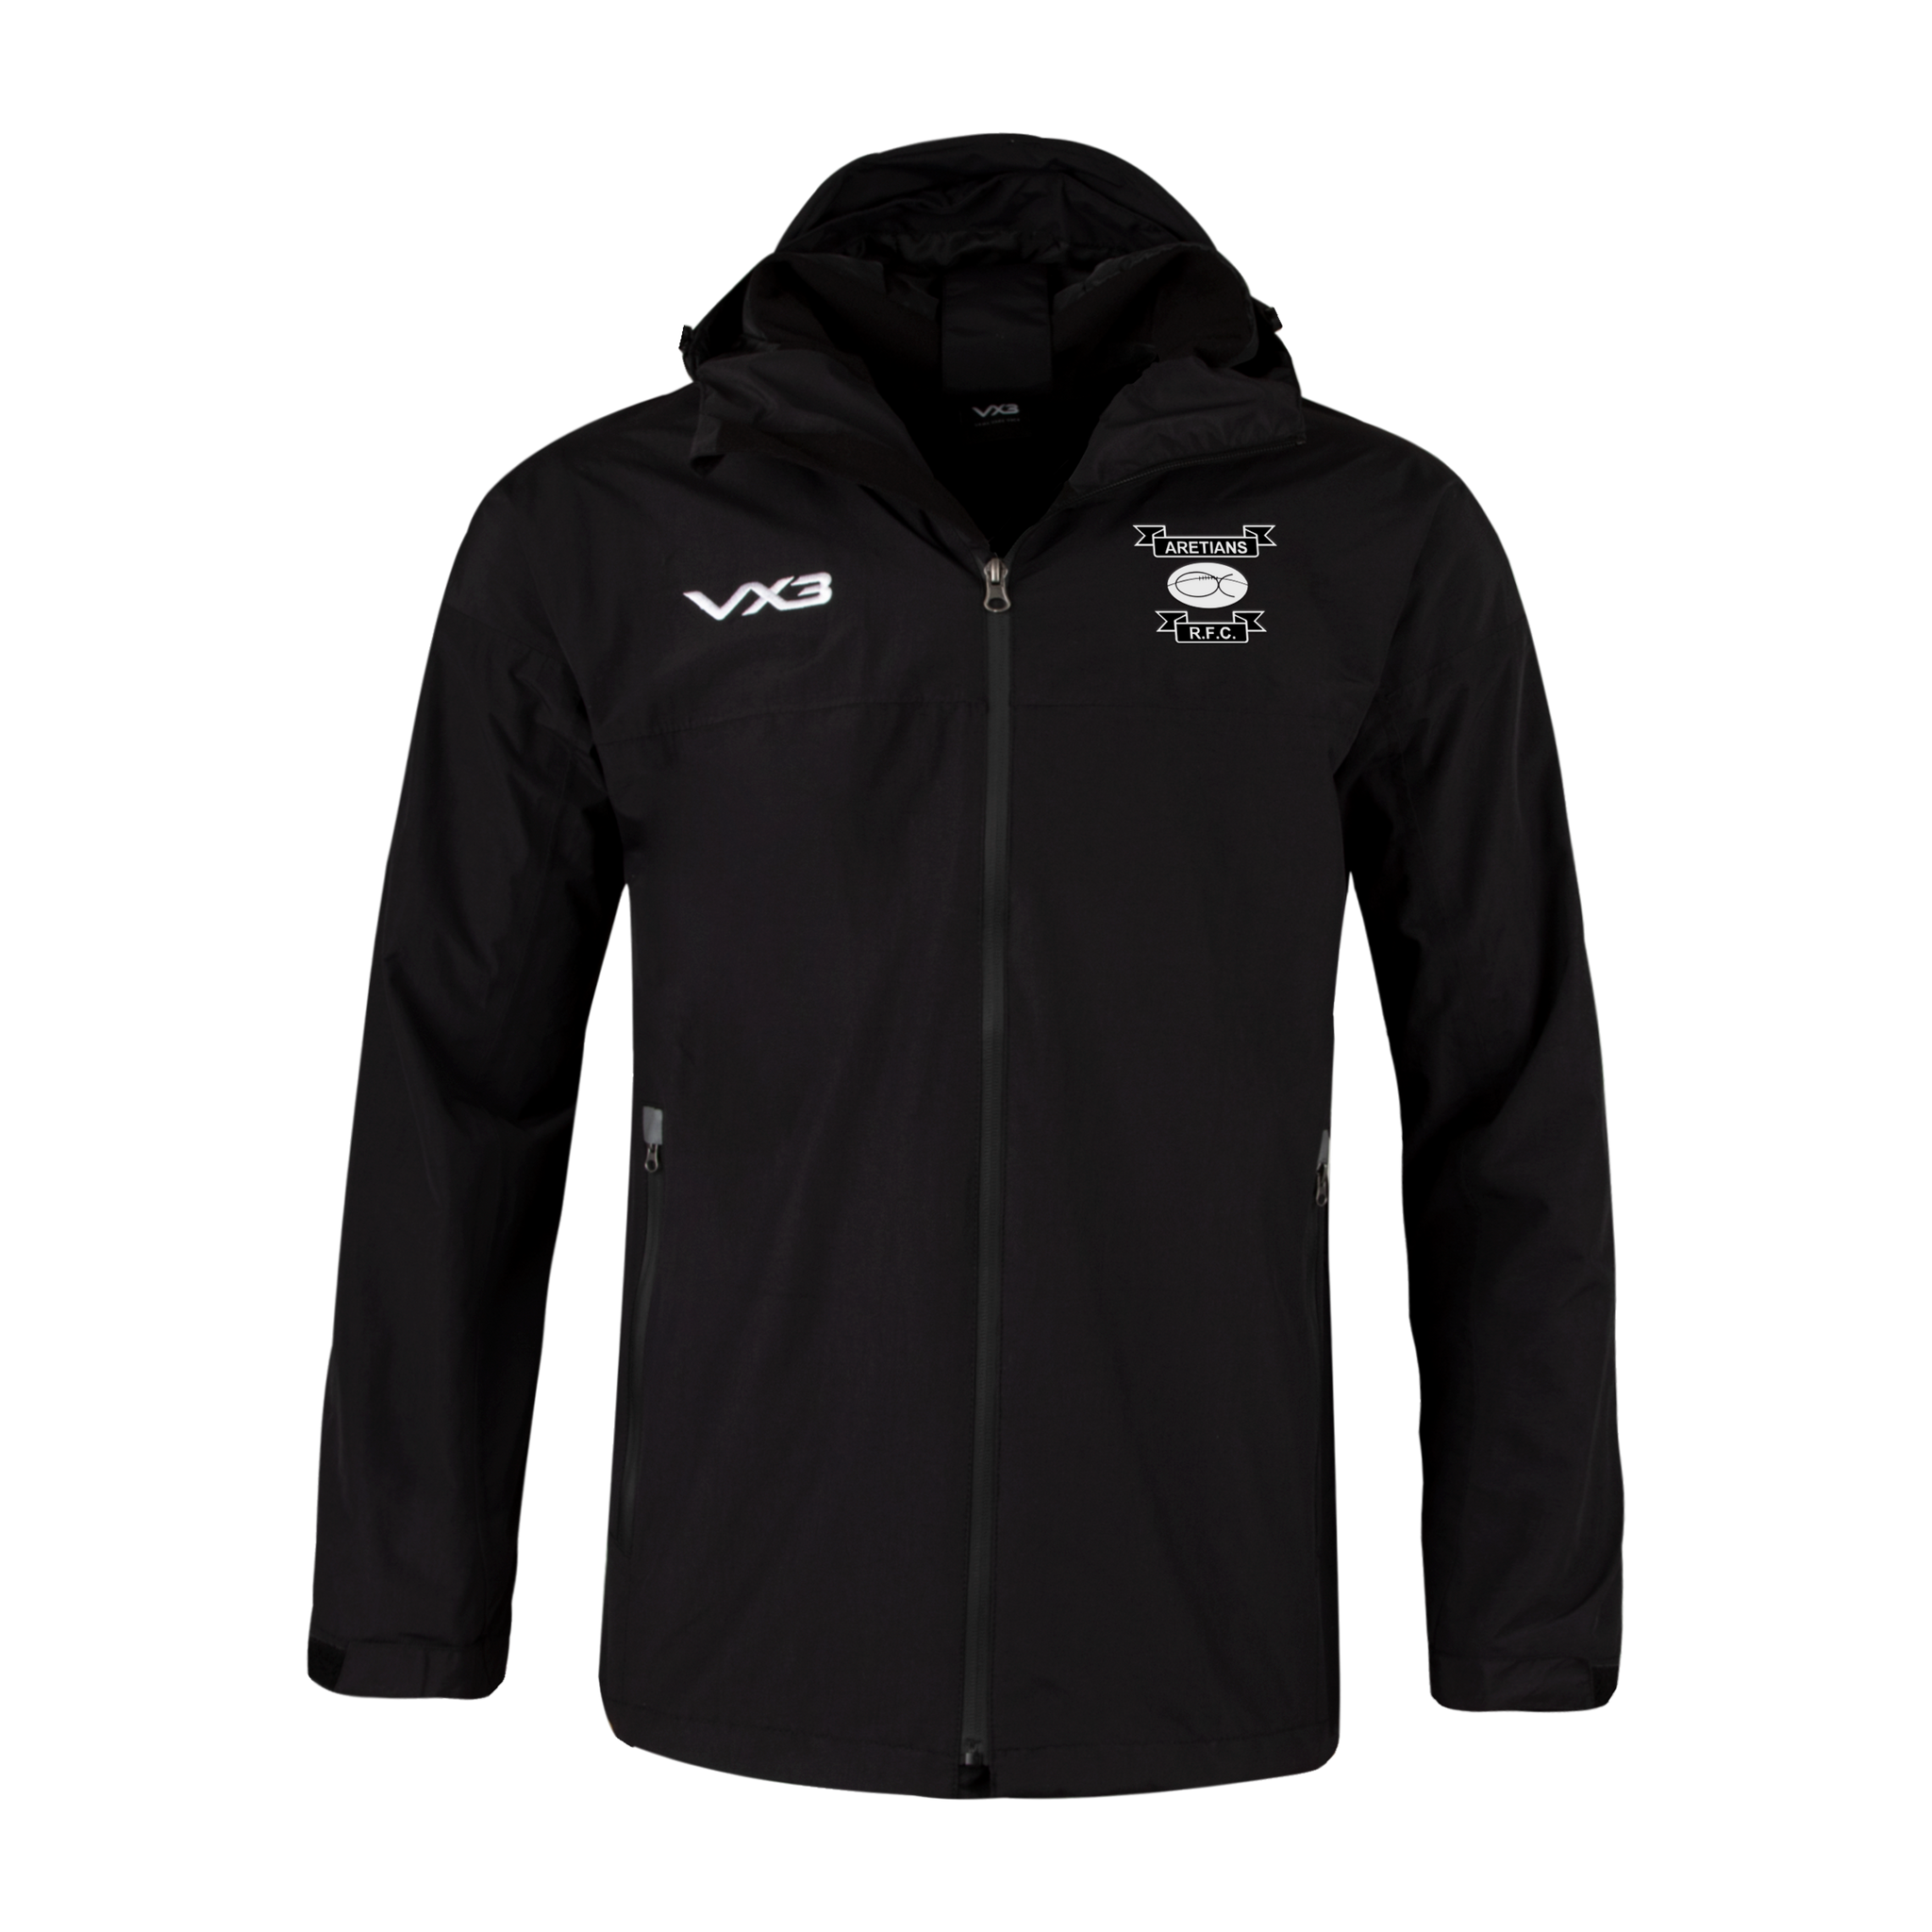 Aretians Rugby Football Club Protego Waterproof Jacket